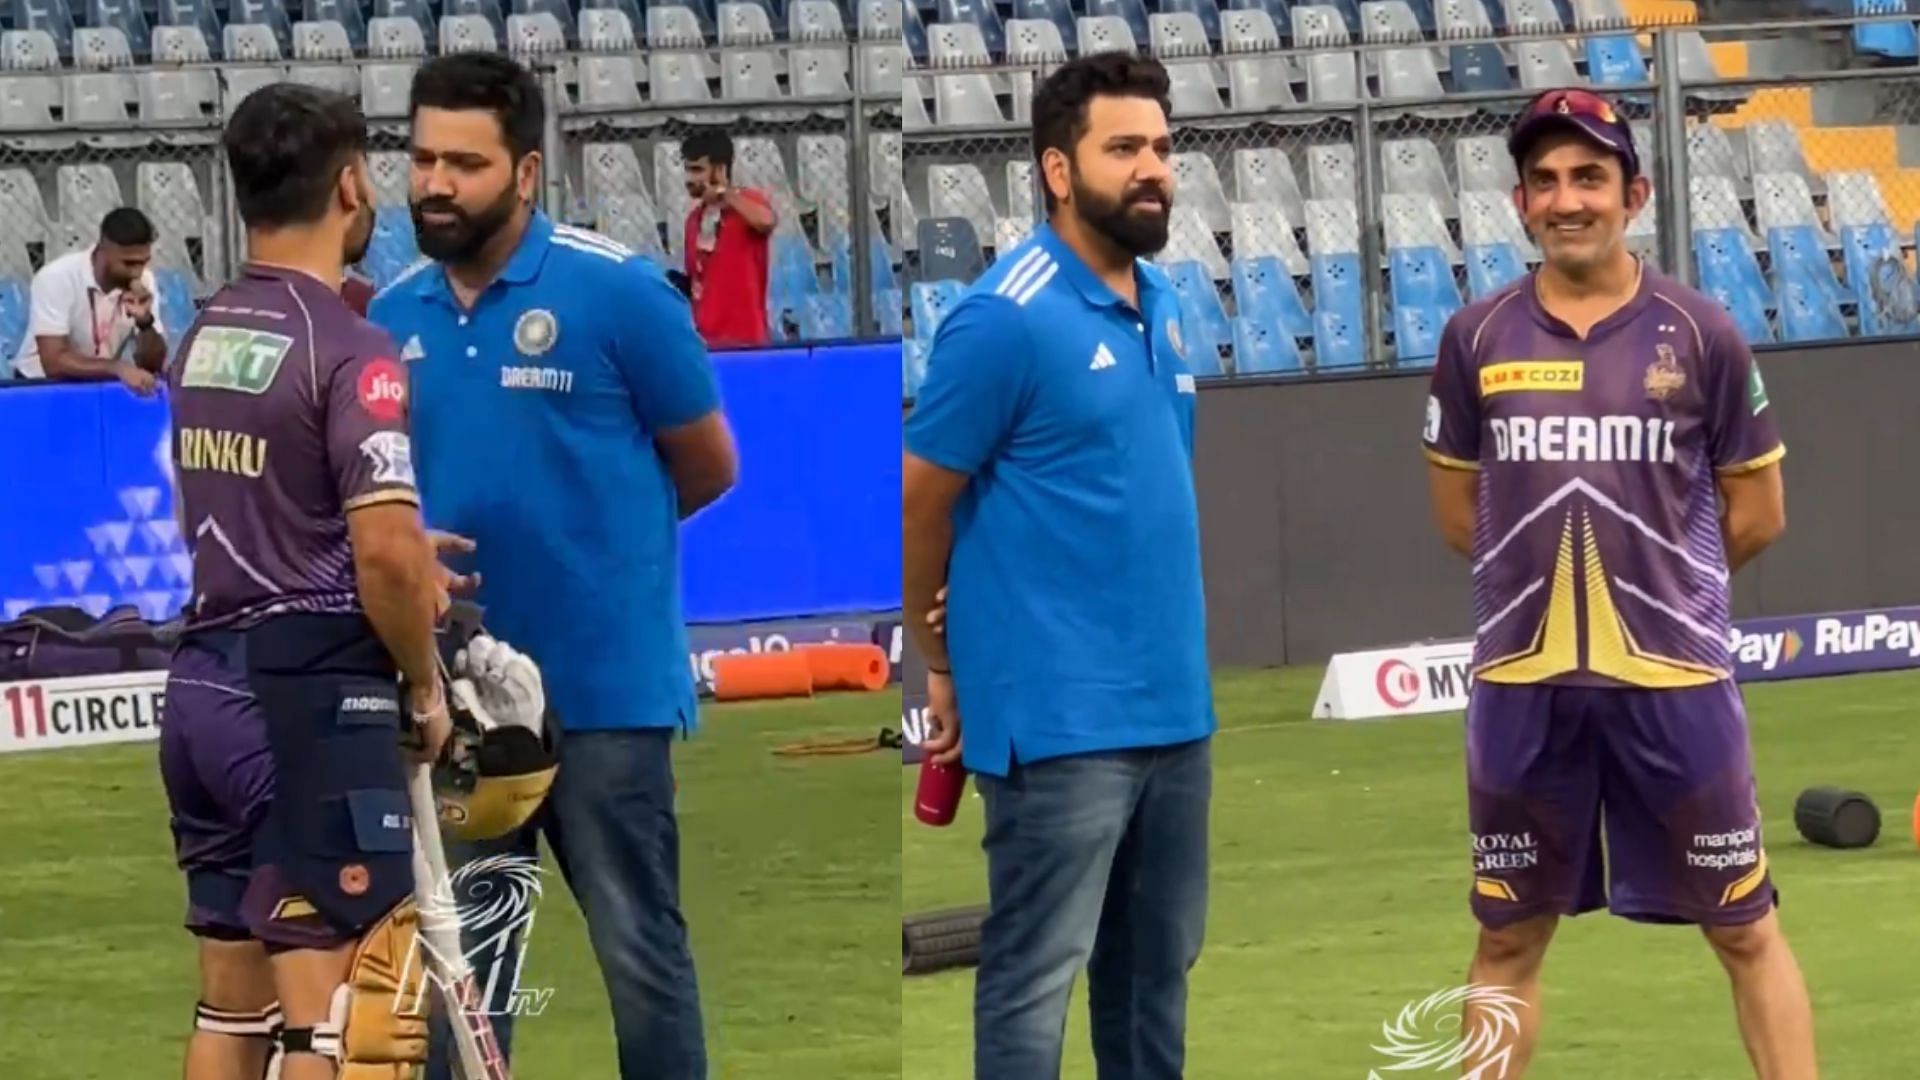 Snippets from Rohit Sharma having a conversation with Rinku and Gambhir